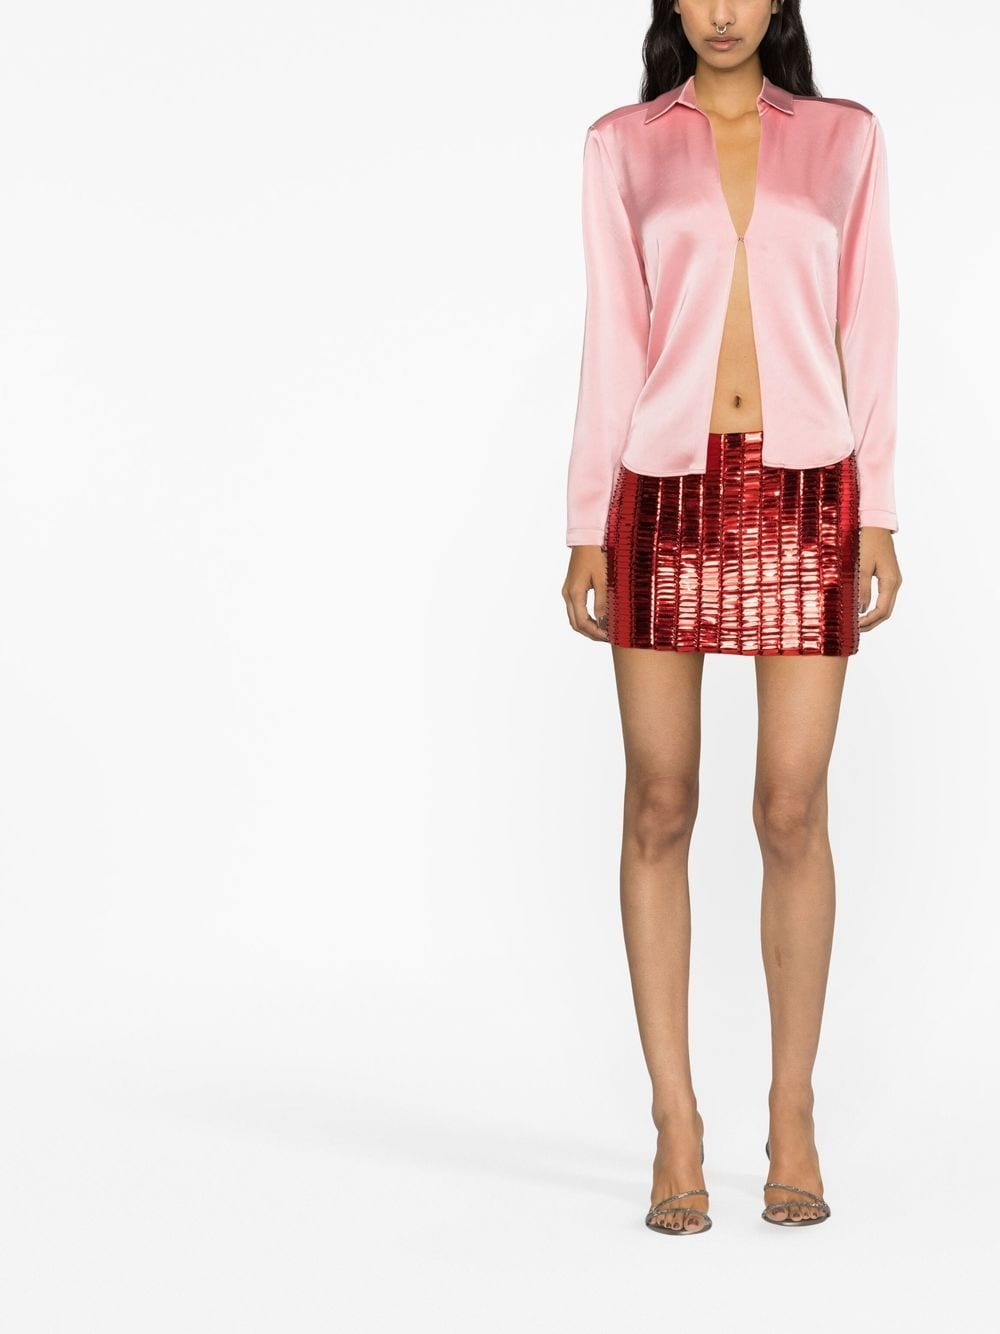 Sparkling Red Miniskirt - SS23 Collection